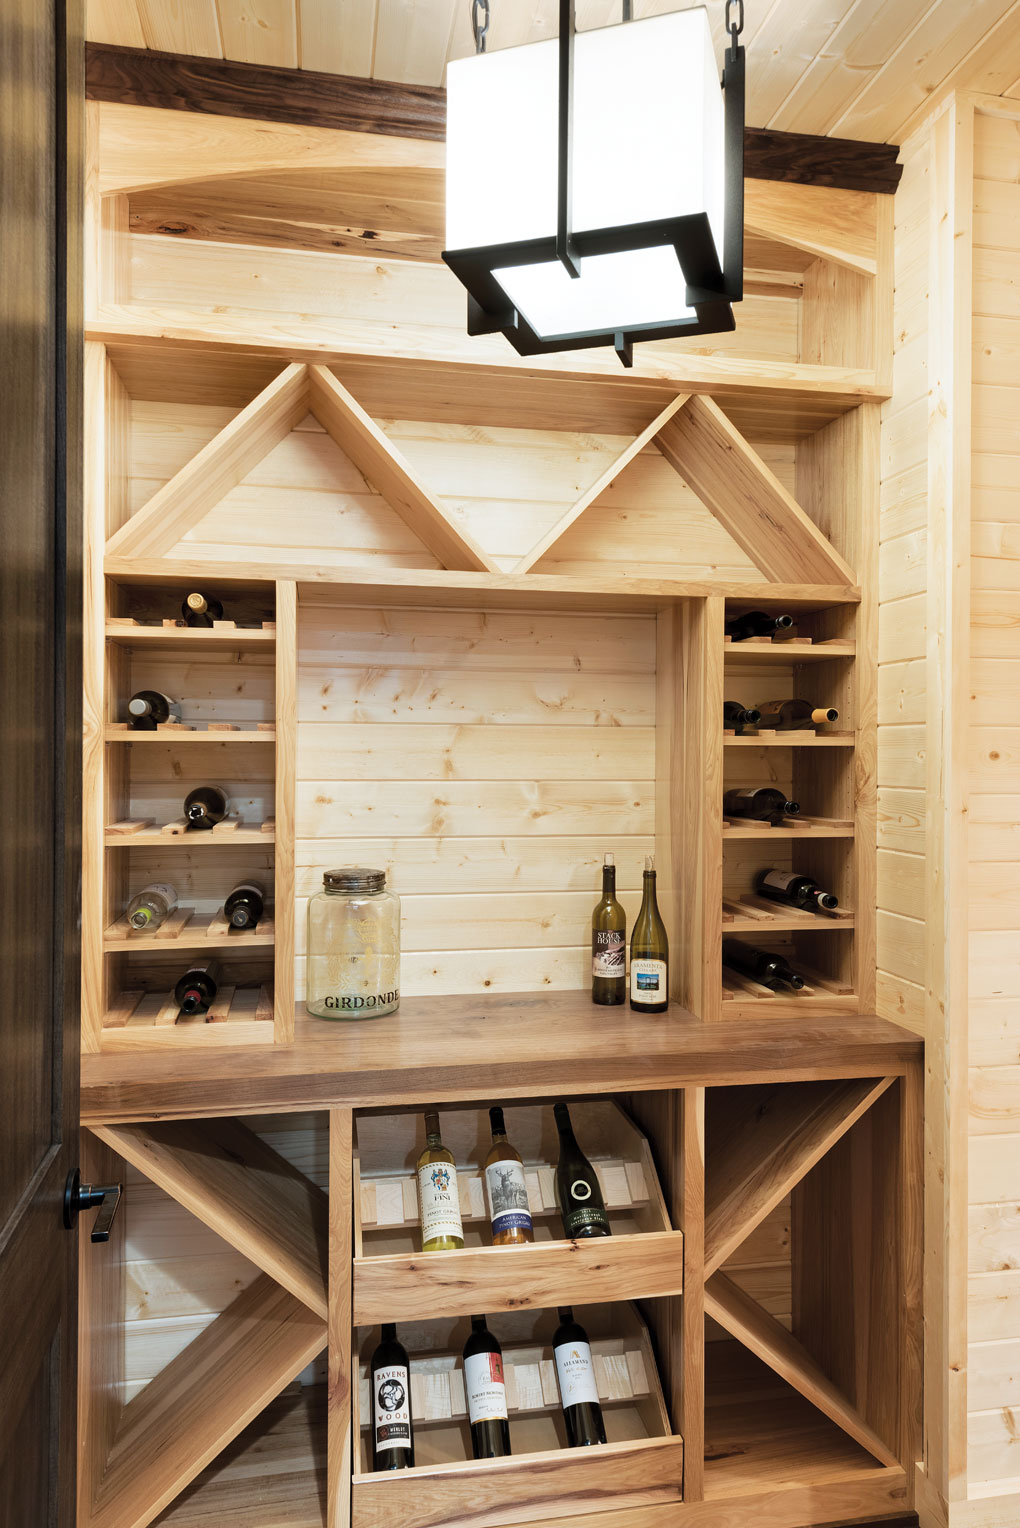 A knotty pine- and hickory-lined wine cellar stocked with bottles of wine.